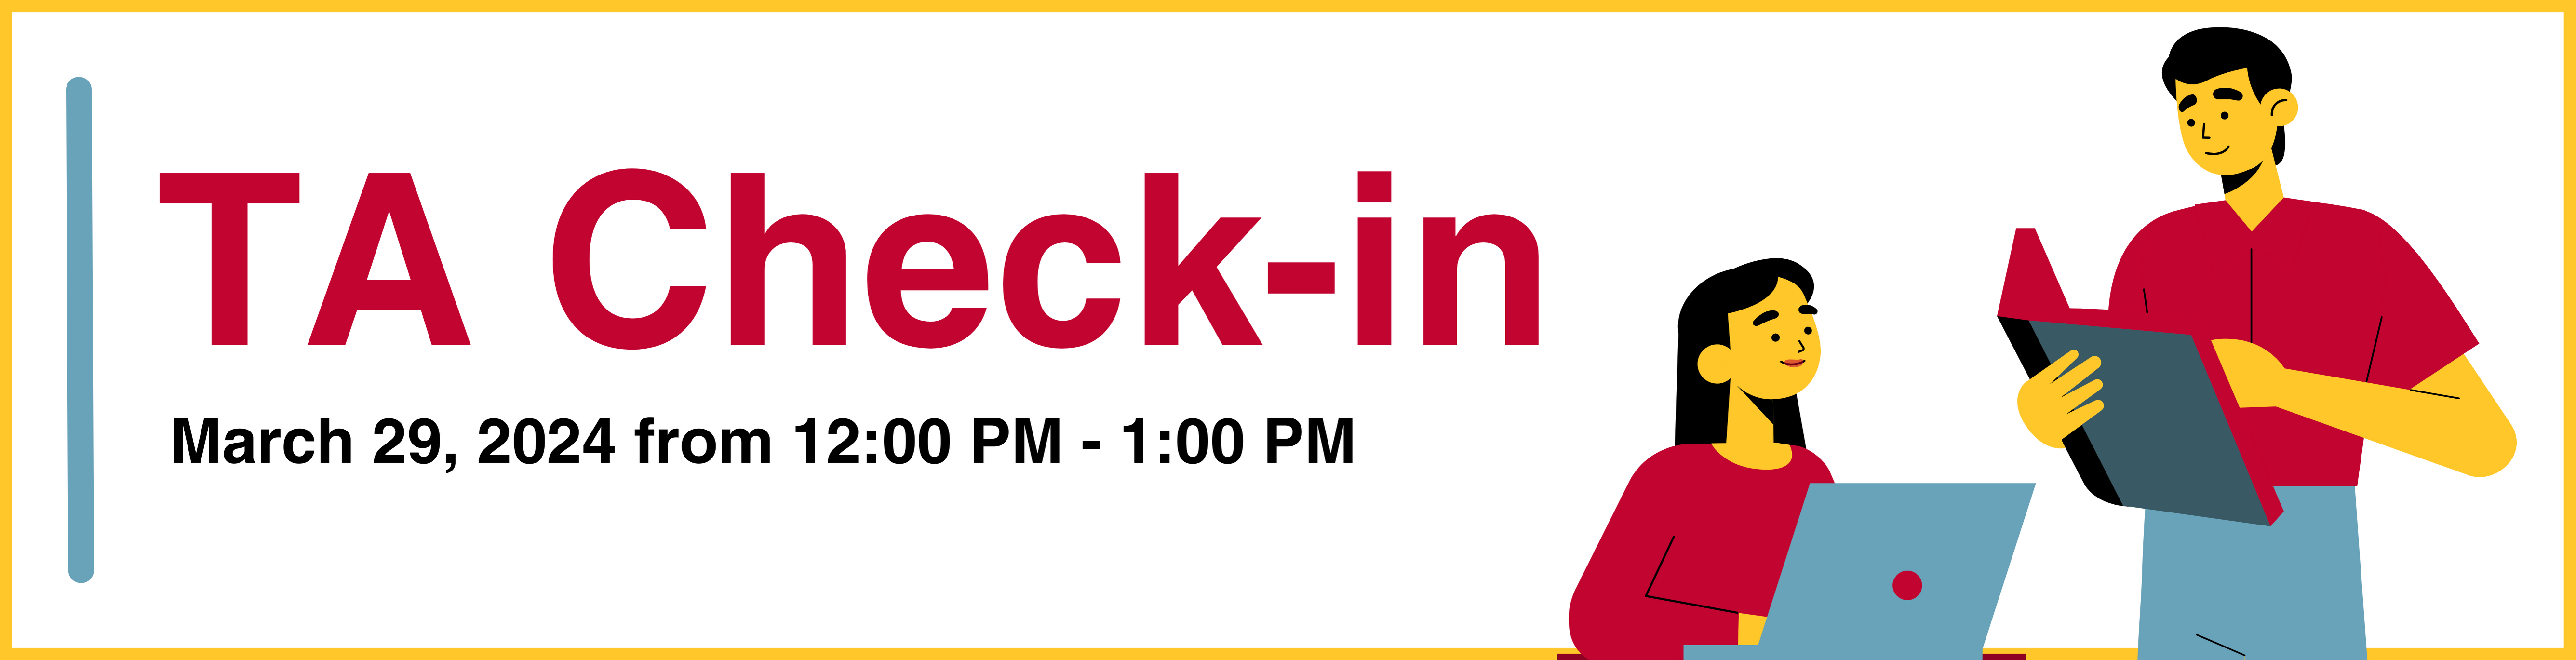 Teaching Assistant Check-in Banner